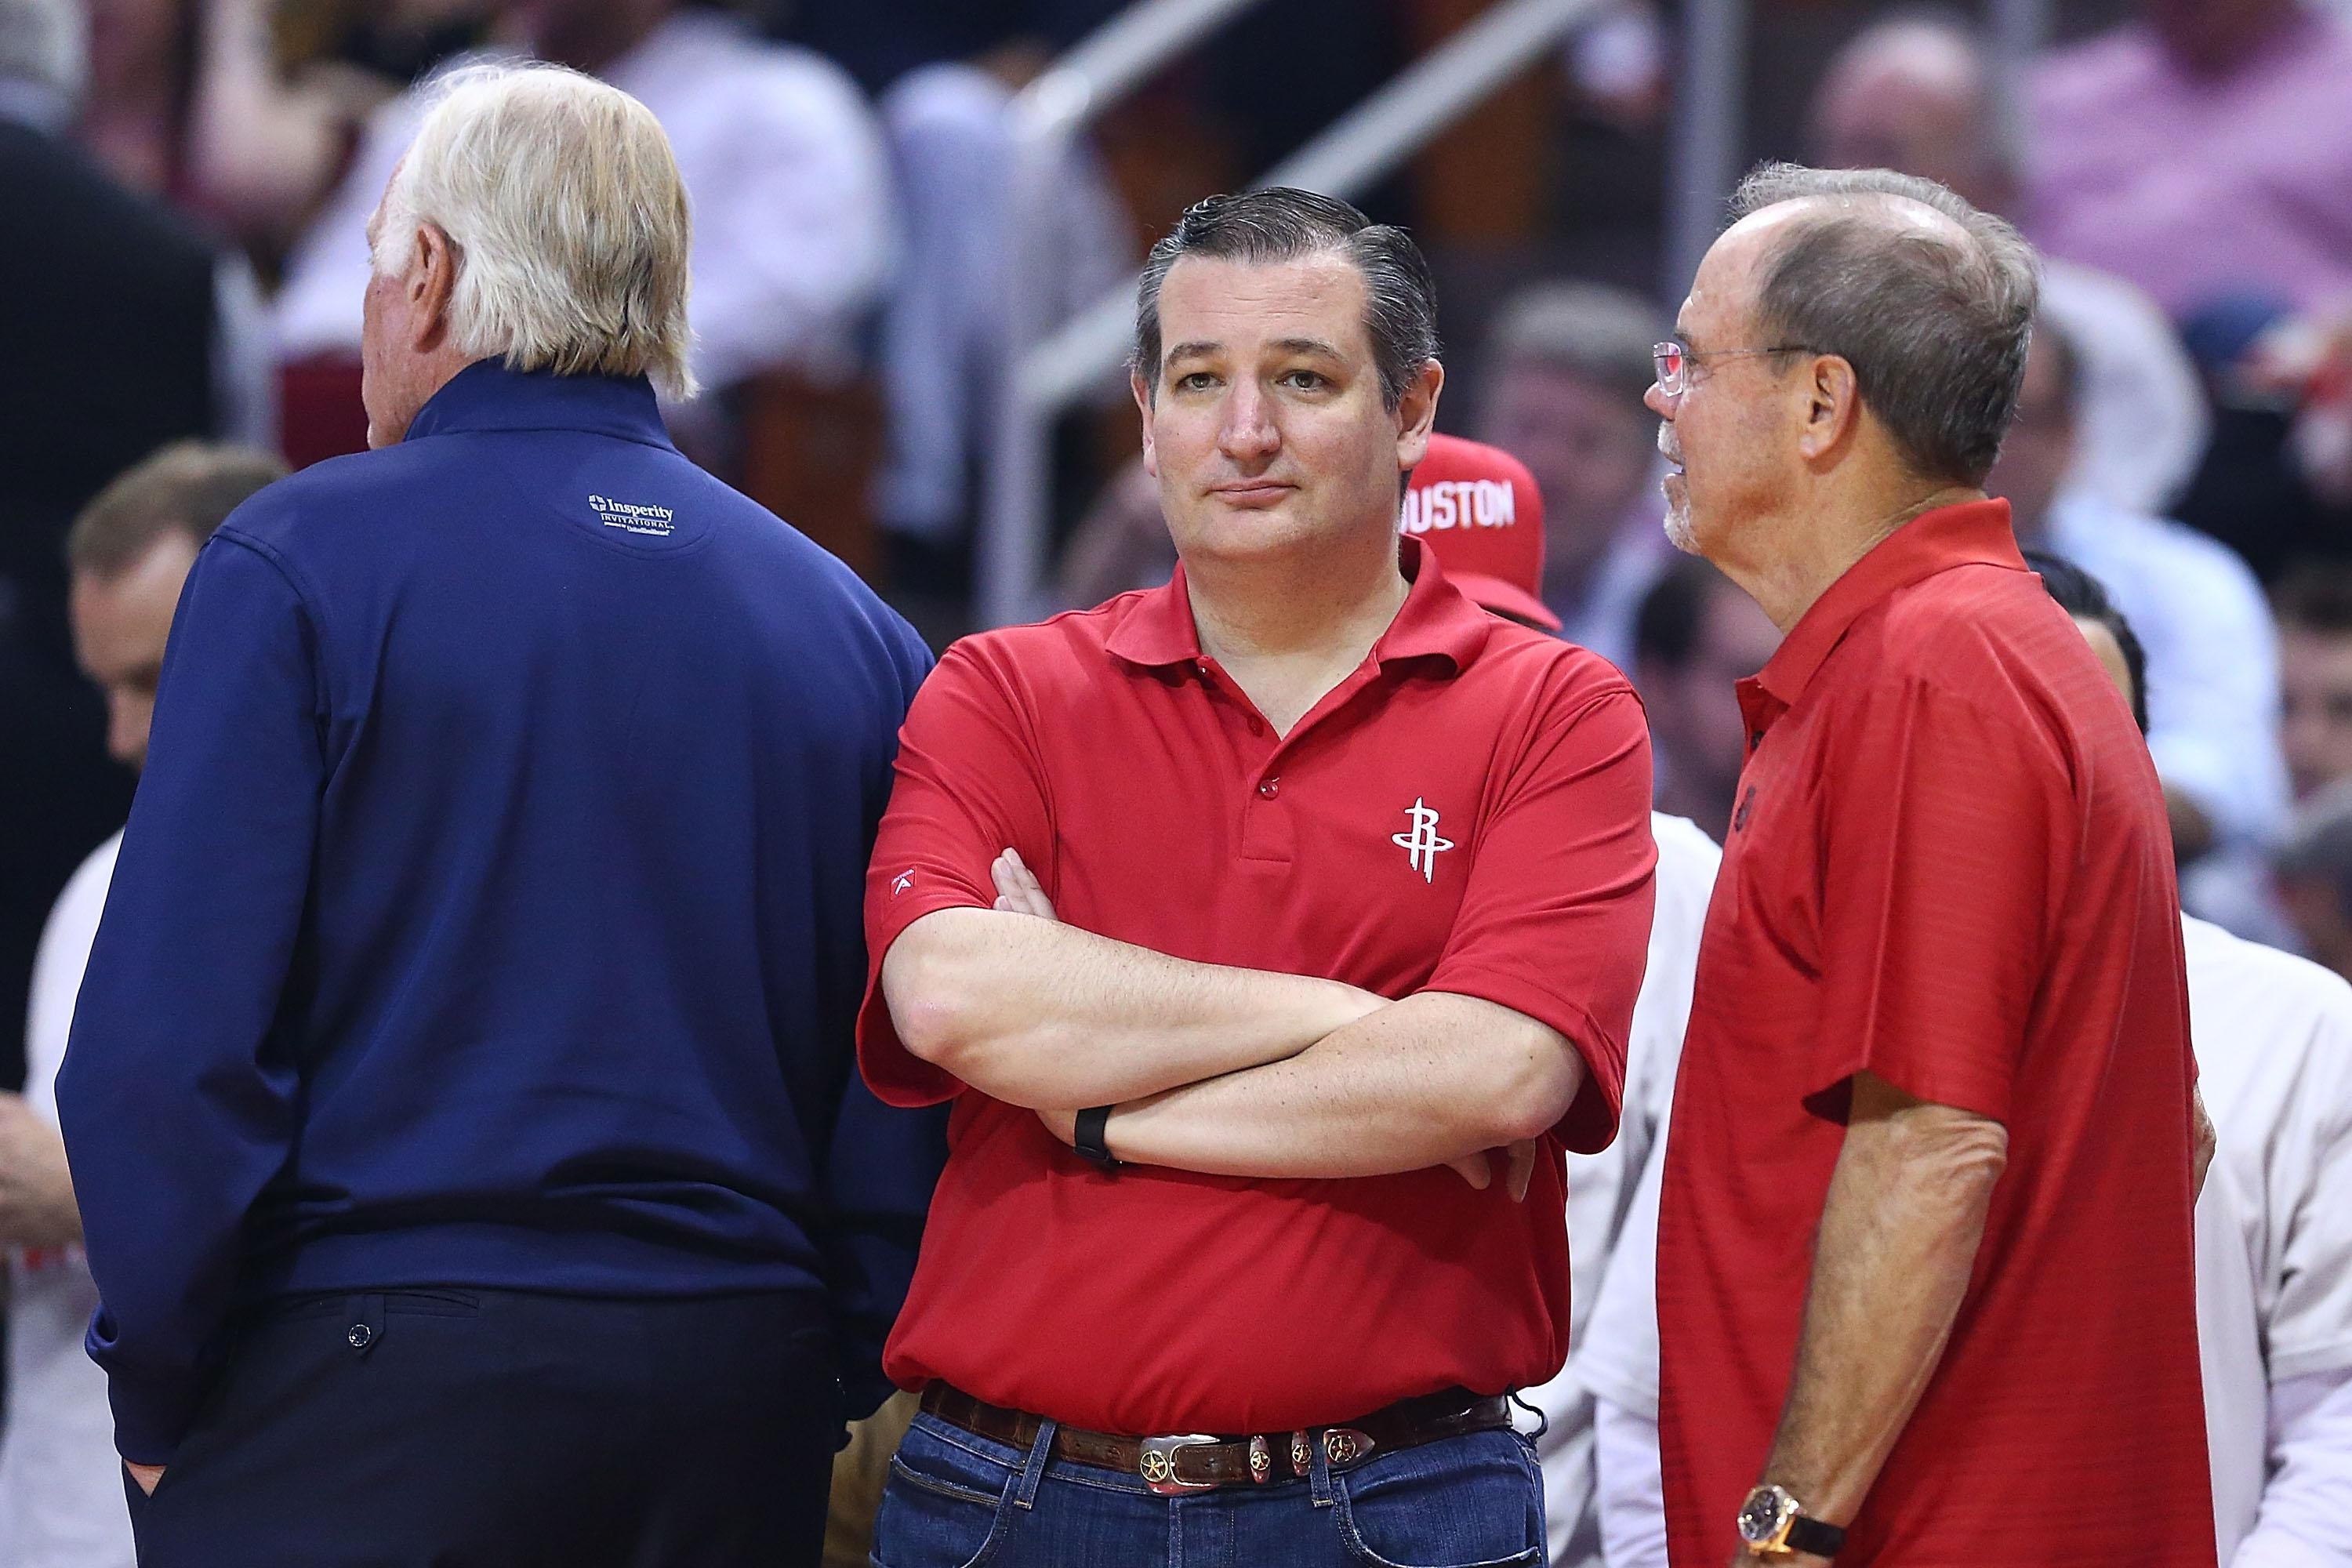 Sen. Ted Cruz of Texas looks on during Game Three of the NBA Western Conference Semi-Finals between the Houston Rockets and San Antonio Spurs at Toyota Center on May 7, 2017 in Houston, Texas. 